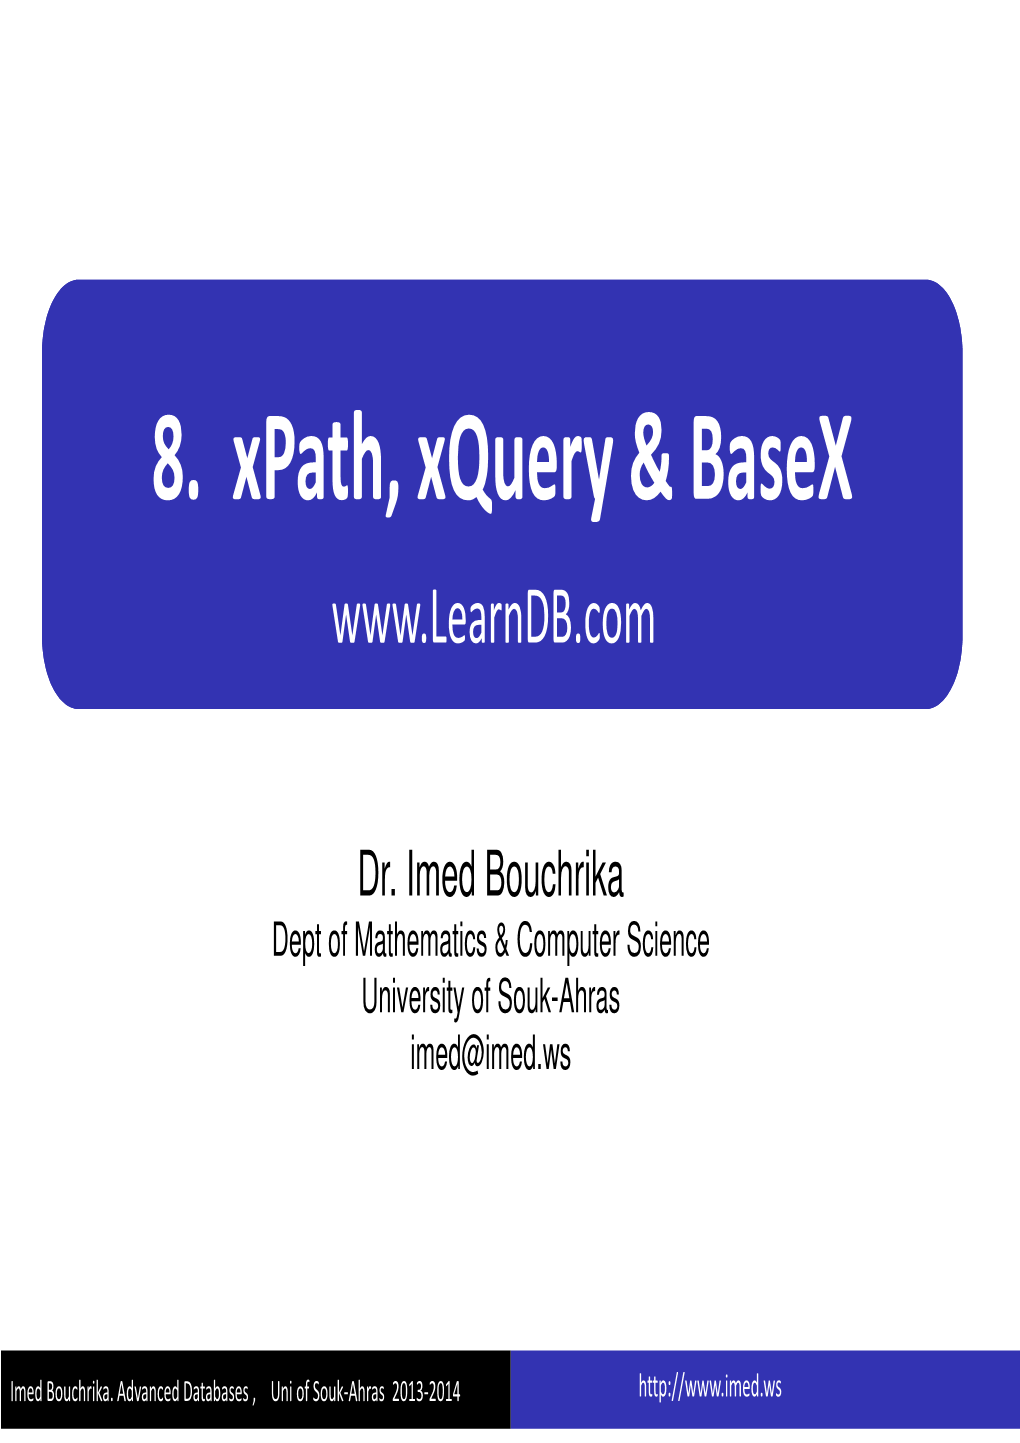 8. Xpath, Xquery & Basex